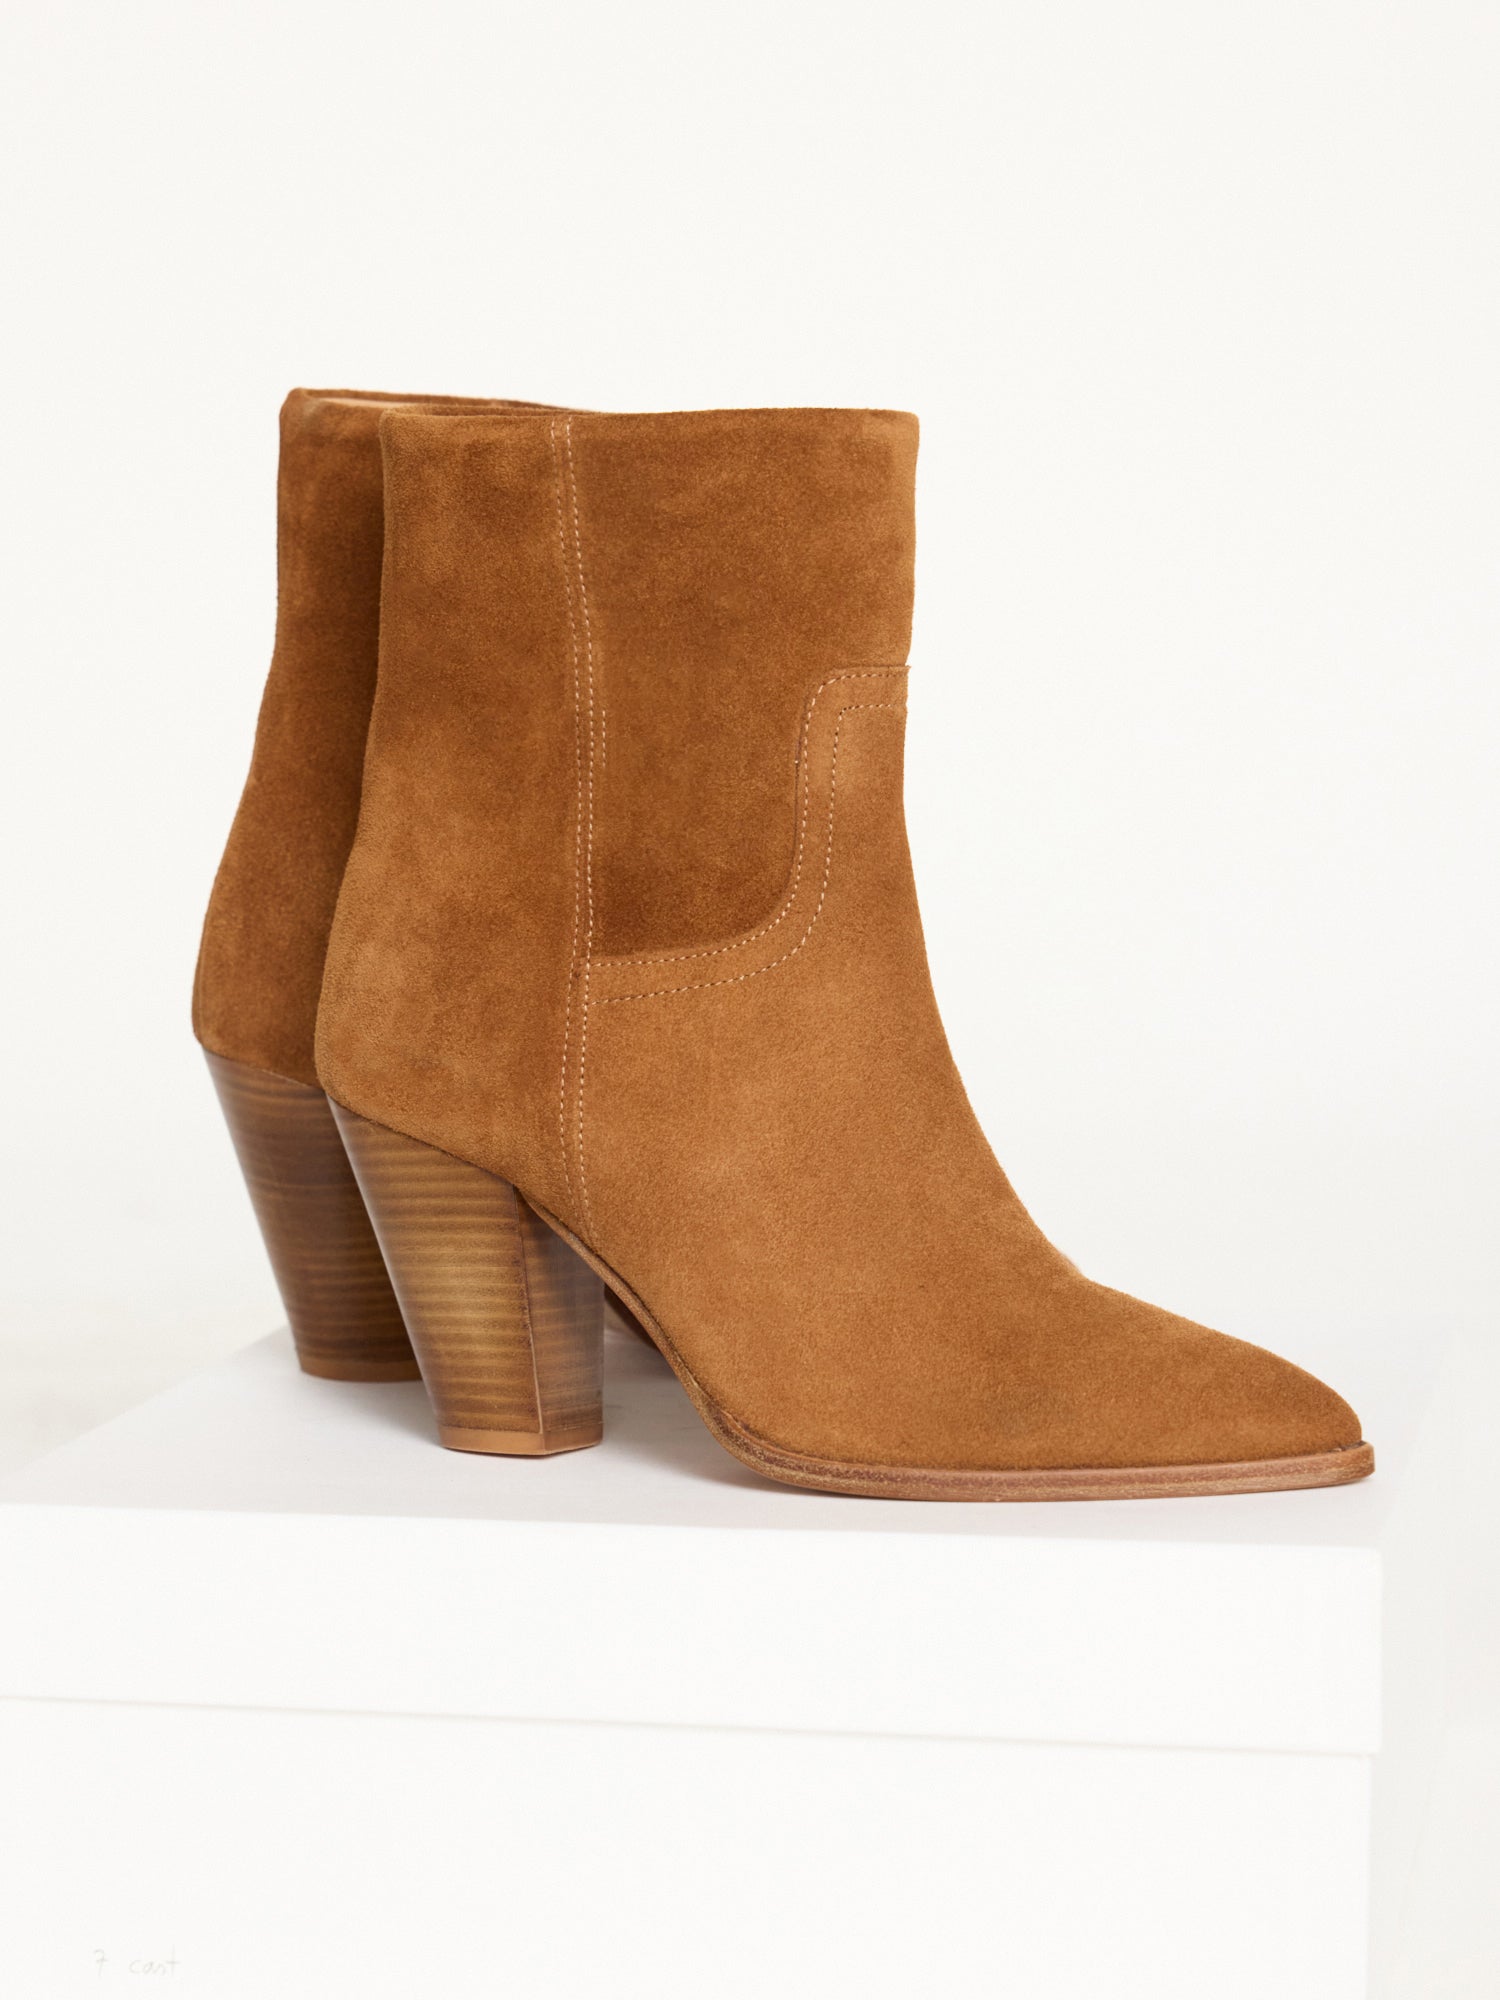 Marfa light brown suded boot side view 4